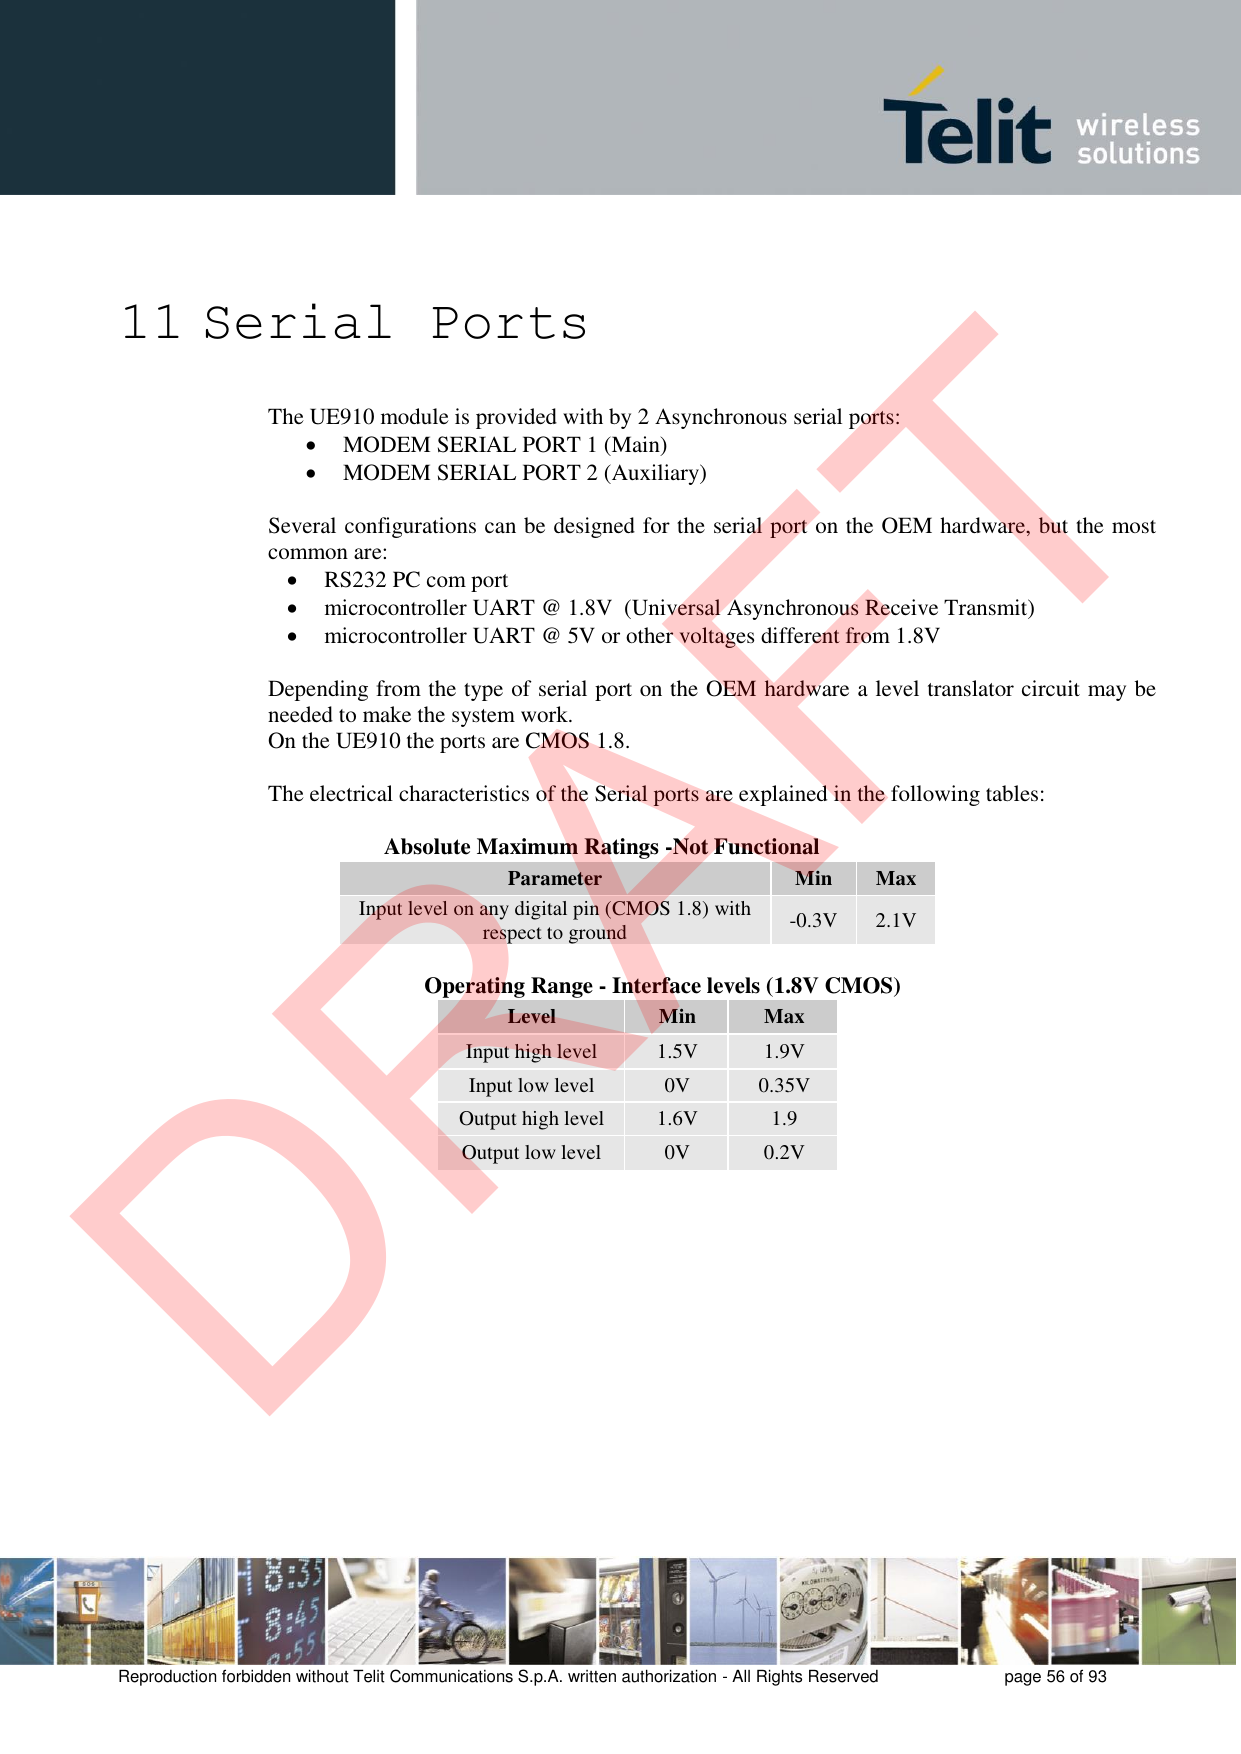 Reproduction forbidden without Telit Communications S.p.A. written authorization - All Rights Reserved  page 56 of 93 11 Serial Ports The UE910 module is provided with by 2 Asynchronous serial ports: MODEM SERIAL PORT 1 (Main)MODEM SERIAL PORT 2 (Auxiliary)Several configurations can be designed for the serial port on the OEM hardware, but the most common are: RS232 PC com portmicrocontroller UART @ 1.8V  (Universal Asynchronous Receive Transmit)microcontroller UART @ 5V or other voltages different from 1.8VDepending from the type of serial port on the OEM hardware a level translator circuit may be needed to make the system work.  On the UE910 the ports are CMOS 1.8. The electrical characteristics of the Serial ports are explained in the following tables: Absolute Maximum Ratings -Not Functional Parameter Min Max Input level on any digital pin (CMOS 1.8) with respect to ground -0.3V2.1V        Operating Range - Interface levels (1.8V CMOS) Level Min Max Input high level 1.5V 1.9V Input low level 0V 0.35V Output high level 1.6V 1.9 Output low level 0V 0.2V DRAFT